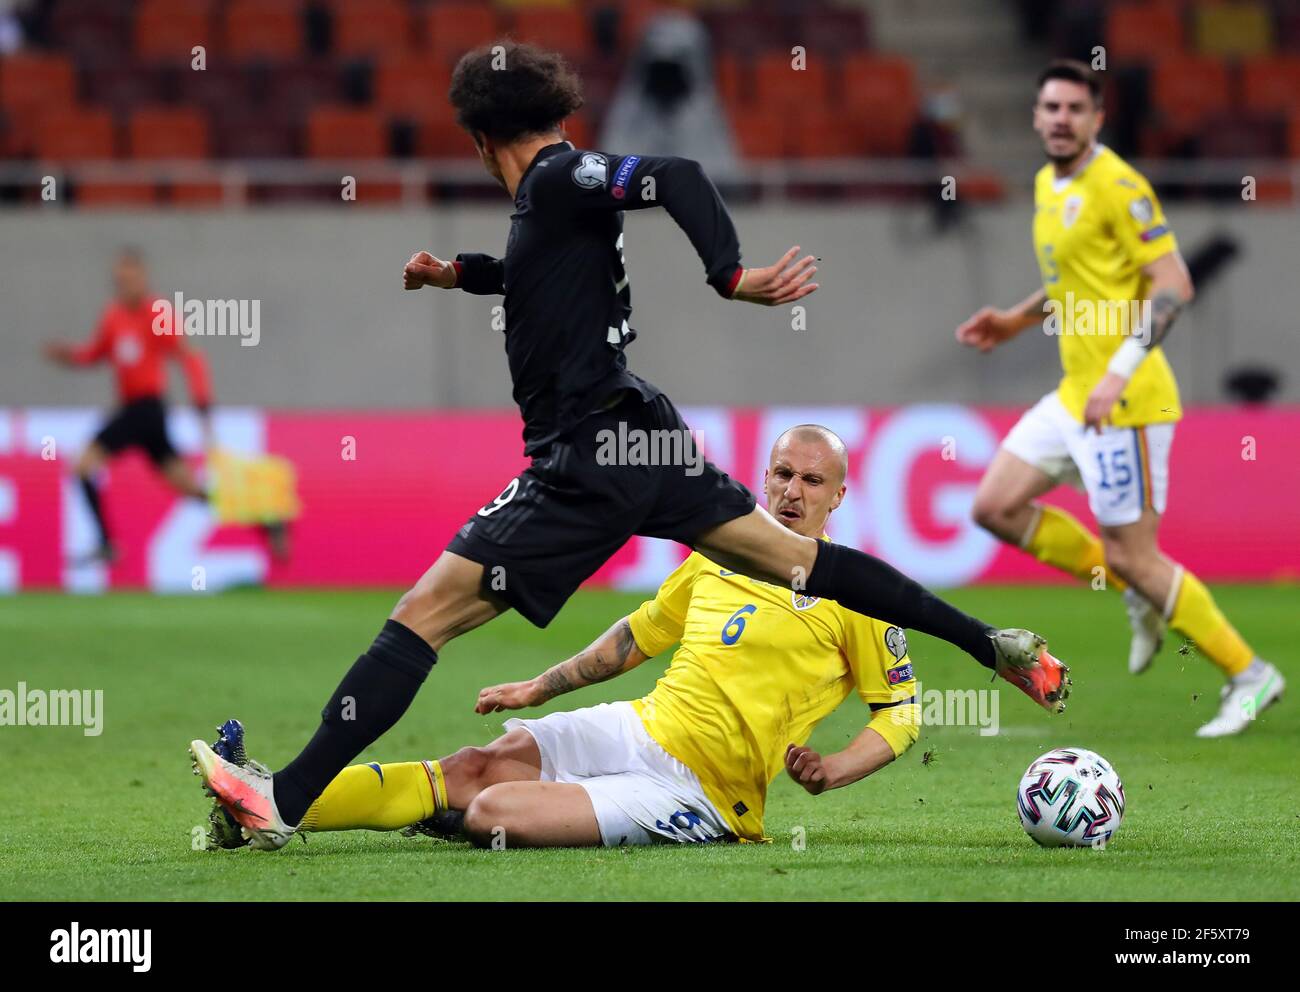 Bukarest, Romania. 28th Mar, 2021. Football: World Cup qualifying Europe, Romania - Germany, Group stage, Group J, Matchday 2 at Arena Nationala. Germany's Leroy Sane and Romania's Vlad Chiriches (u) battle for the ball. IMPORTANT NOTE: In accordance with the regulations of the DFL Deutsche Fußball Liga and the DFB Deutscher Fußball-Bund, it is prohibited to use or have used photographs taken in the stadium and/or of the match in the form of sequence pictures and/or video-like photo series. Credit: Stefan Constantin/dpa/Alamy Live News Stock Photo